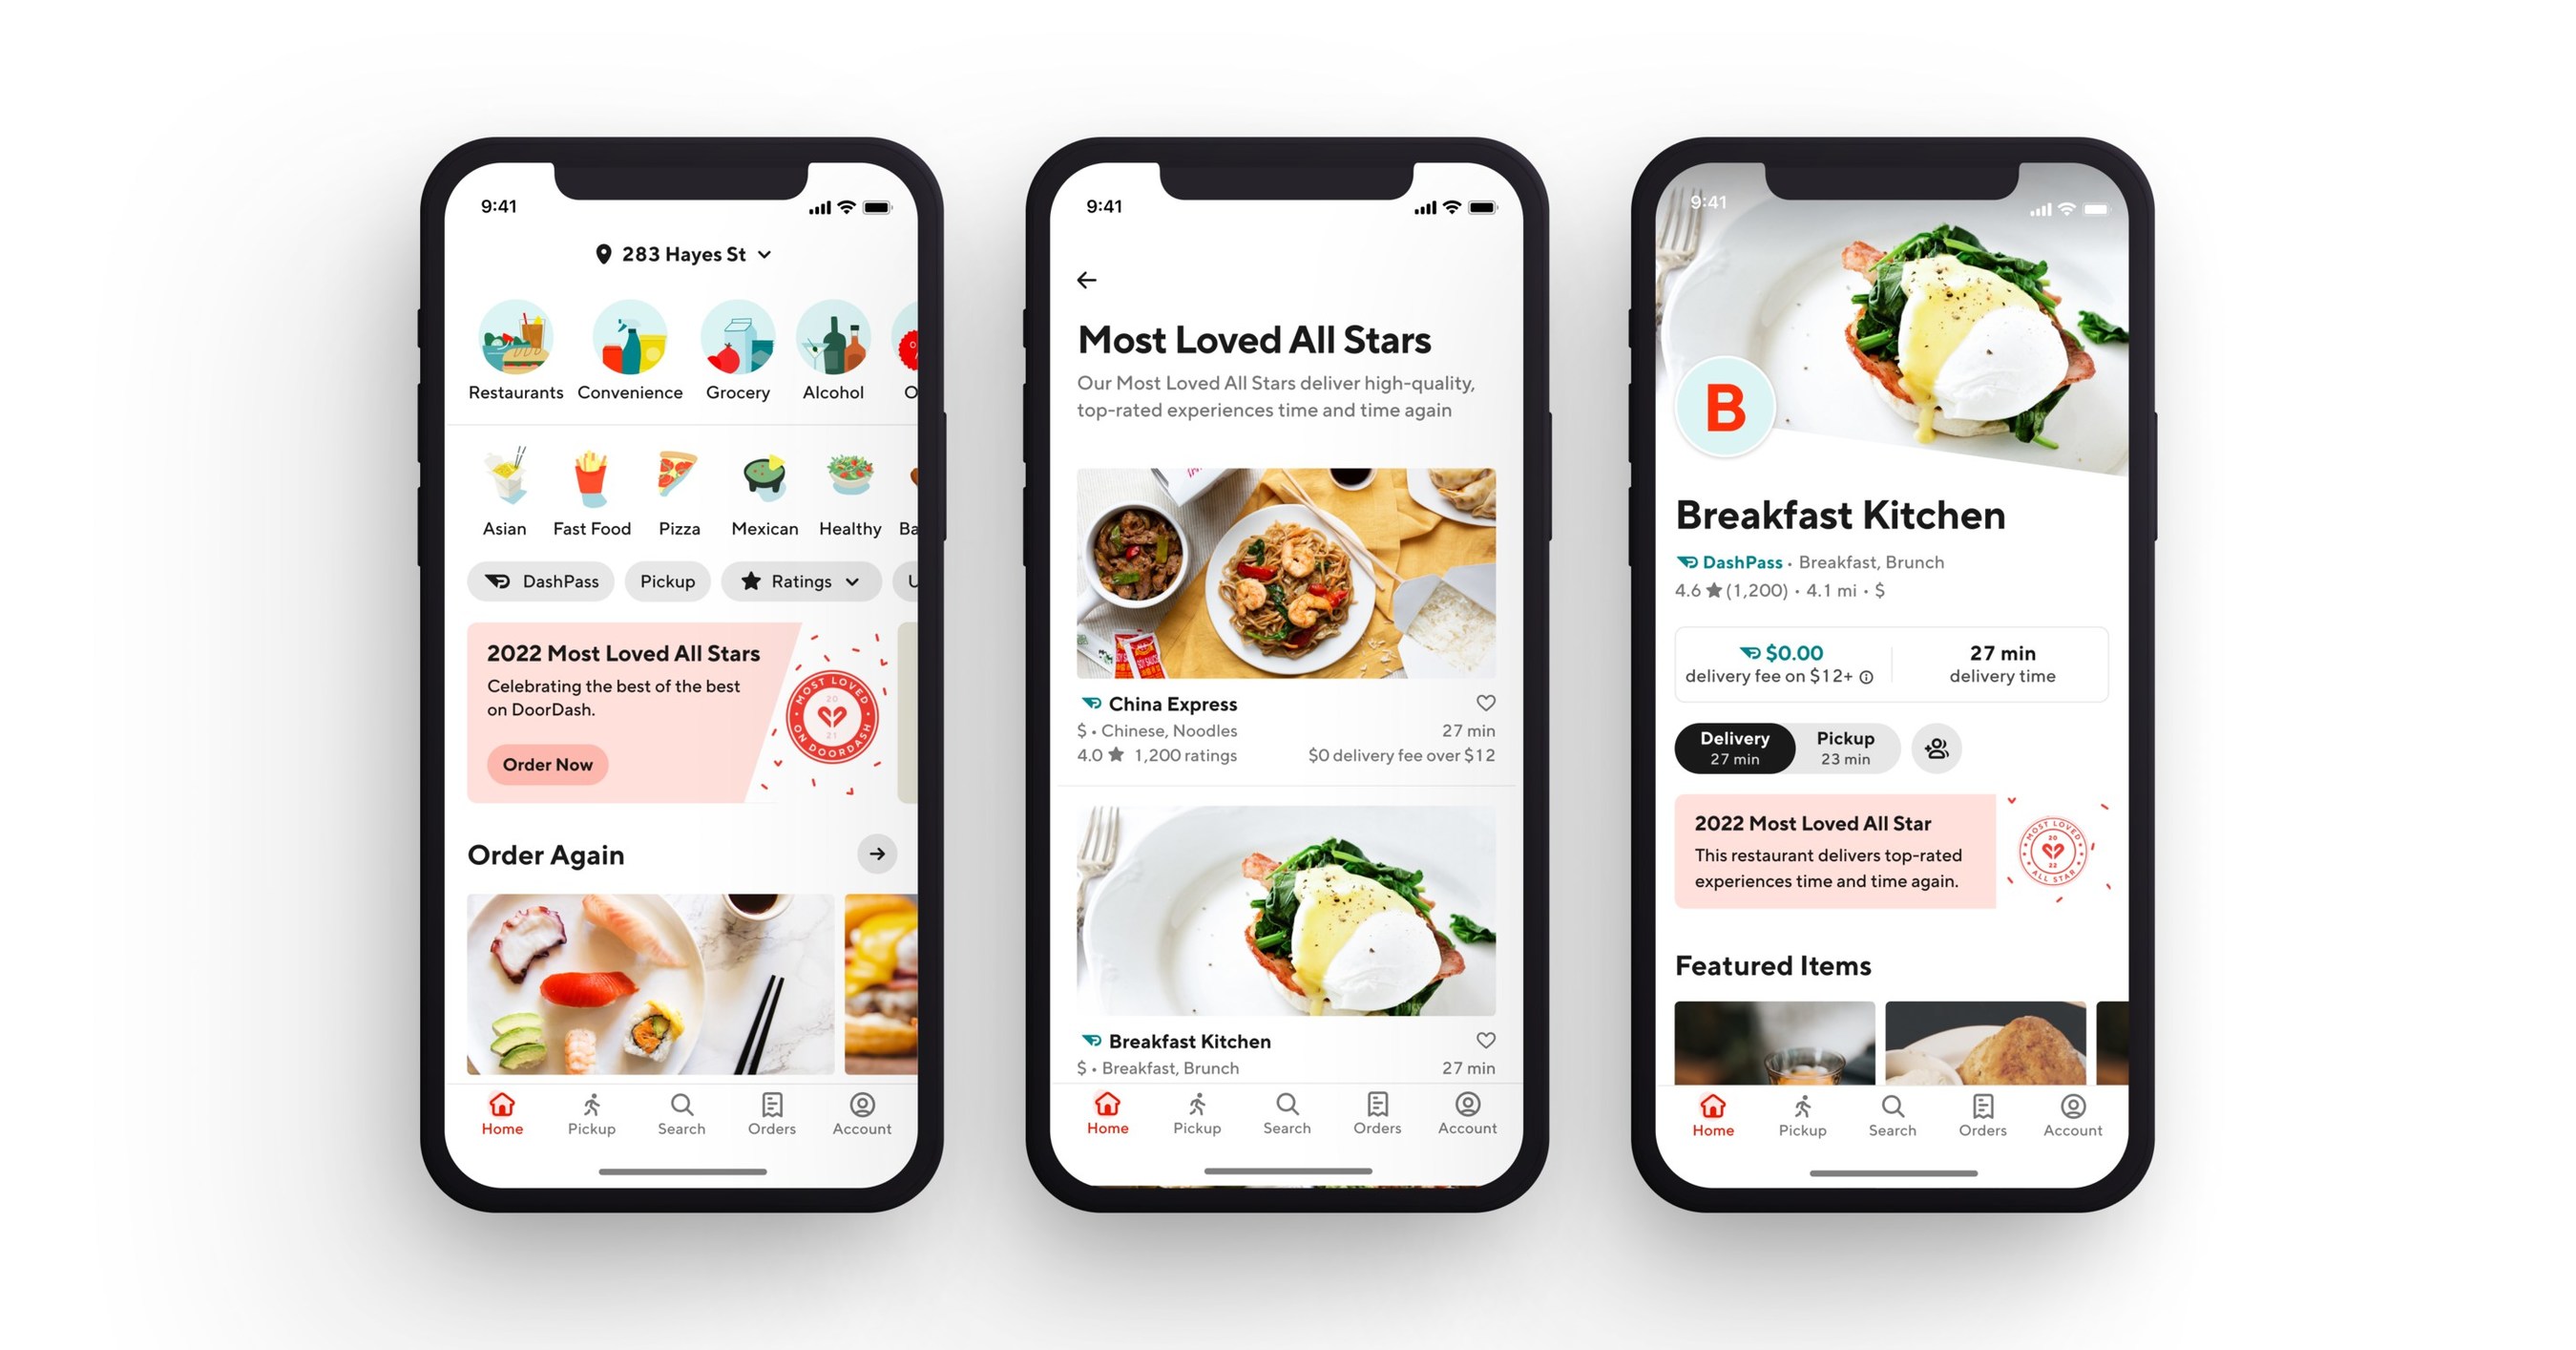 DoorDash Launches Its First Shared Commissary Kitchen, Offering Customers  More Restaurant Selection